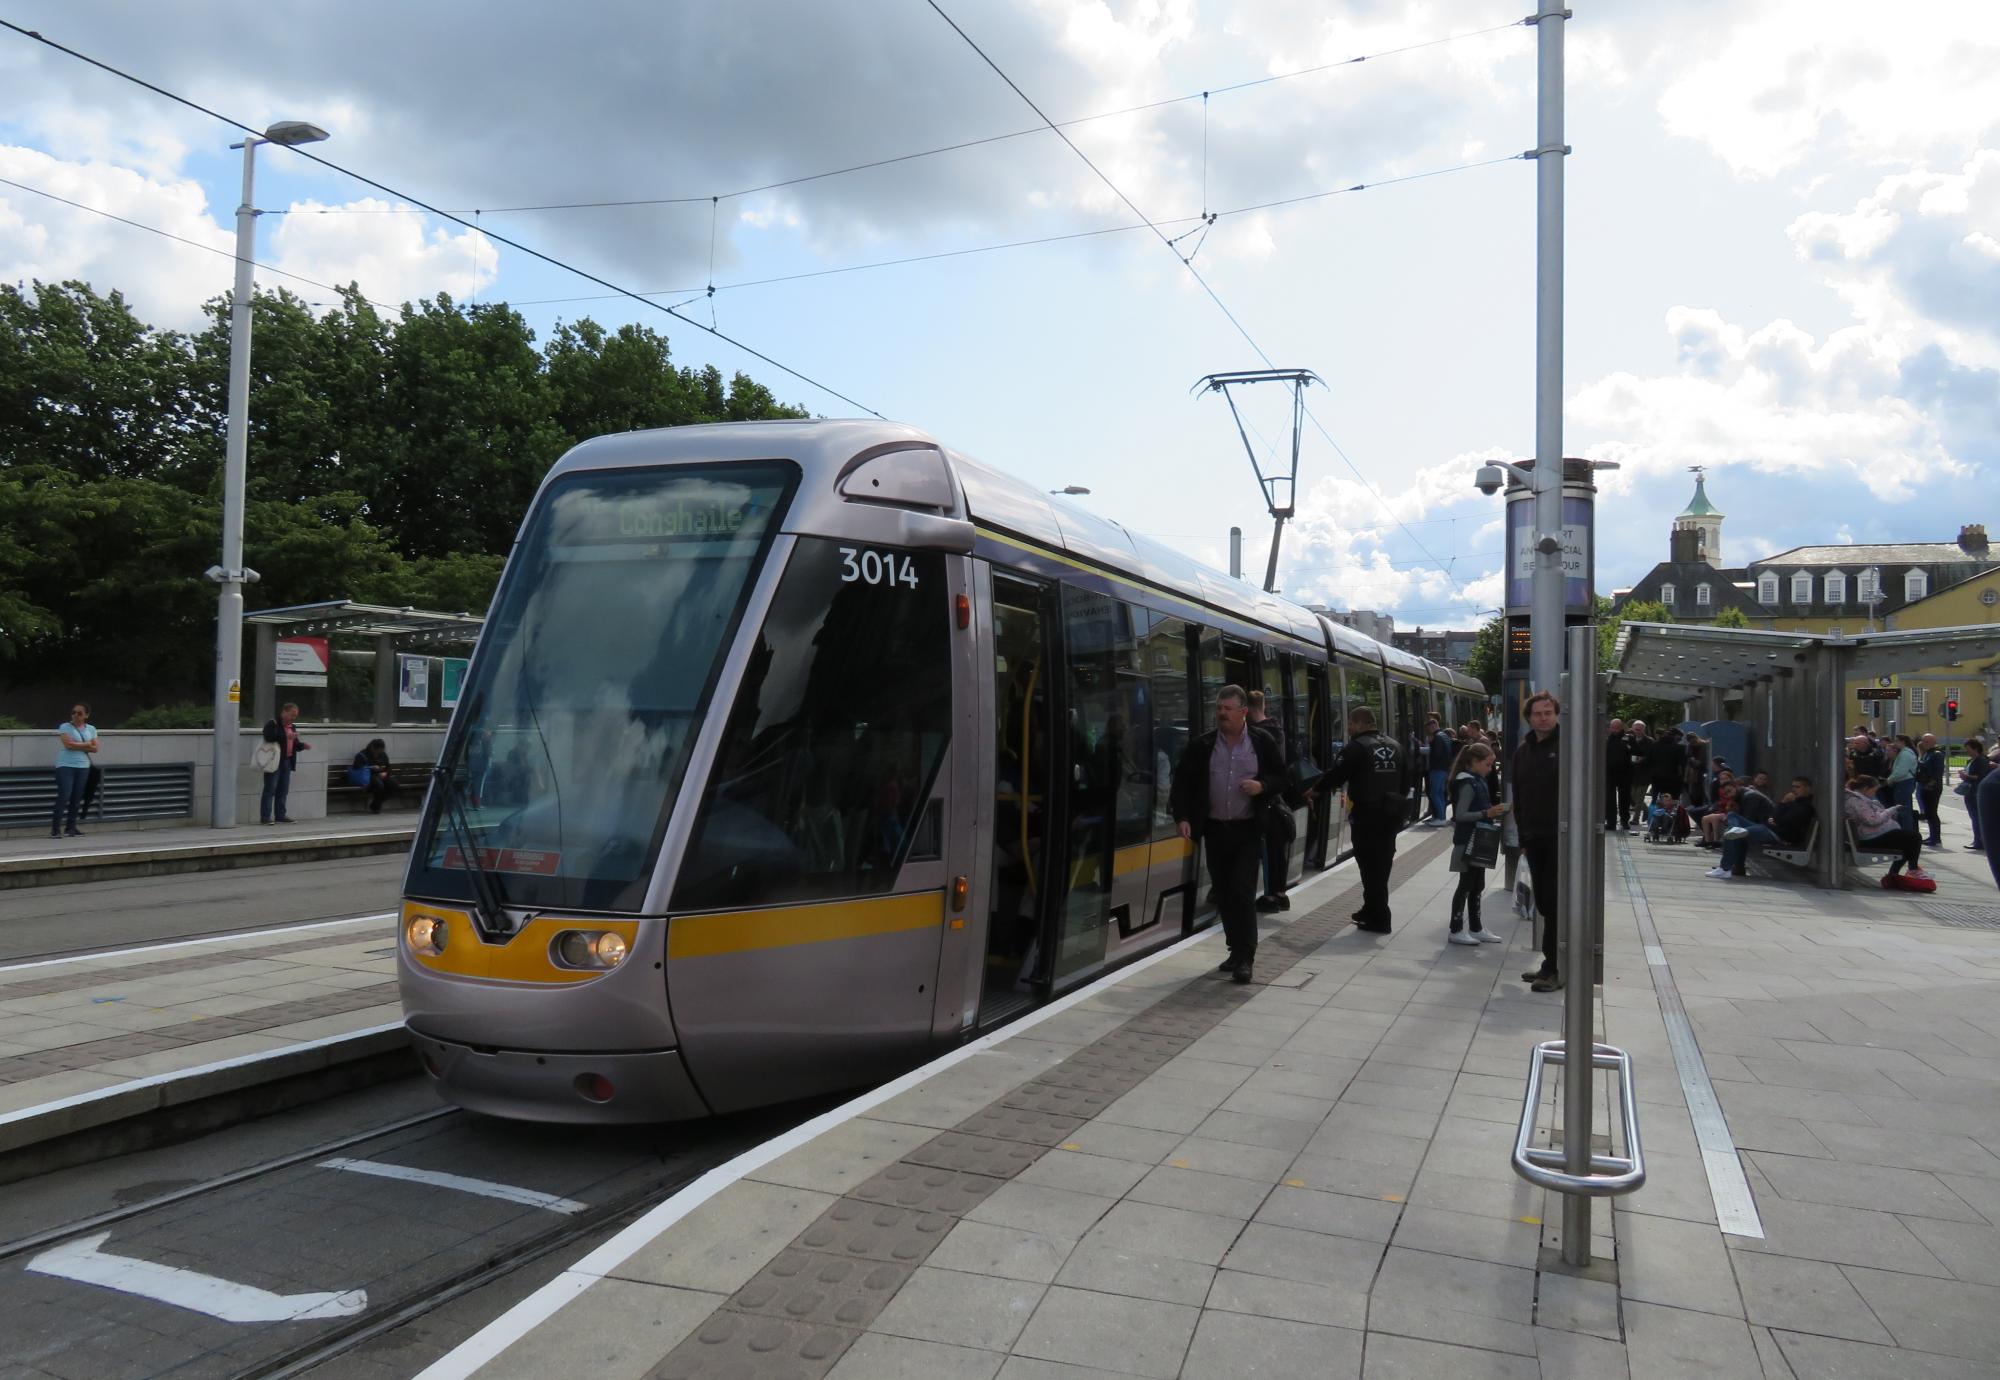 Translink upgrade operational software as part of wider strategy